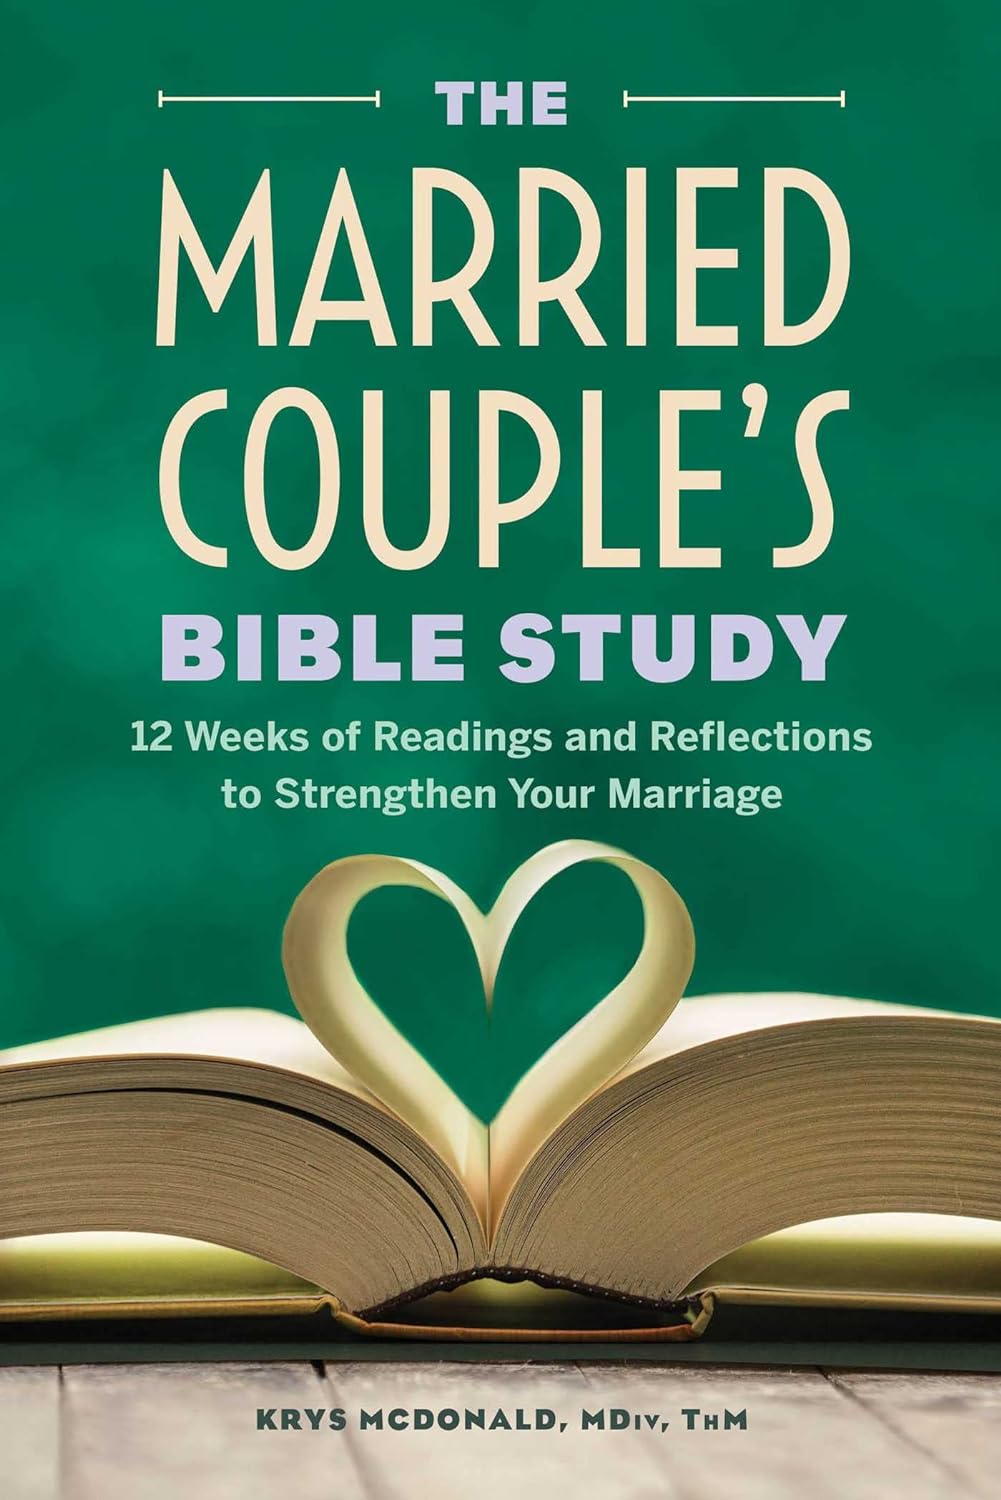 The Married Couple’s Bible Study: 12 Weeks of Readings and Reflections to Strengthen Your Marriage